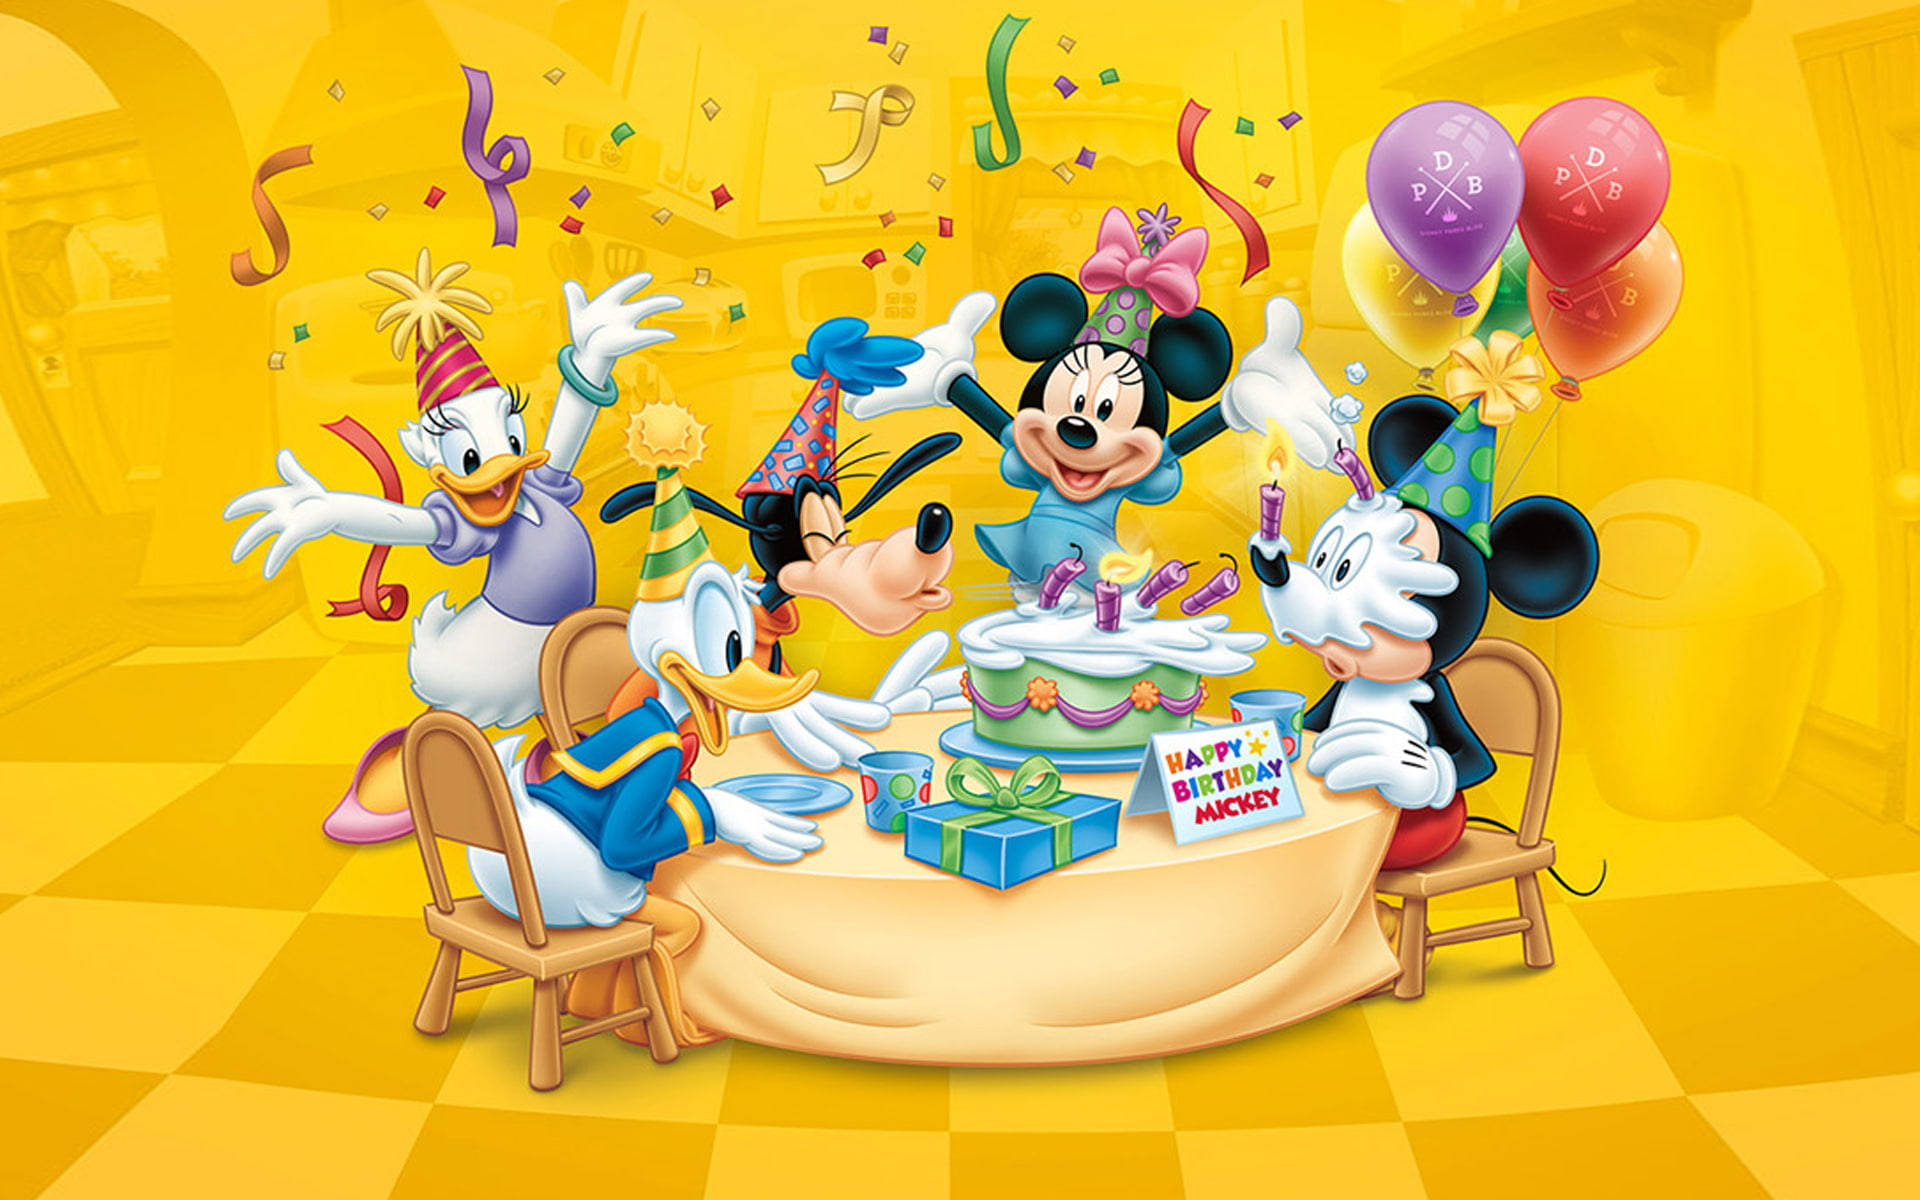 Glorious Mickey Mouse Birthday Celebration In A Vibrant Yellow Room.